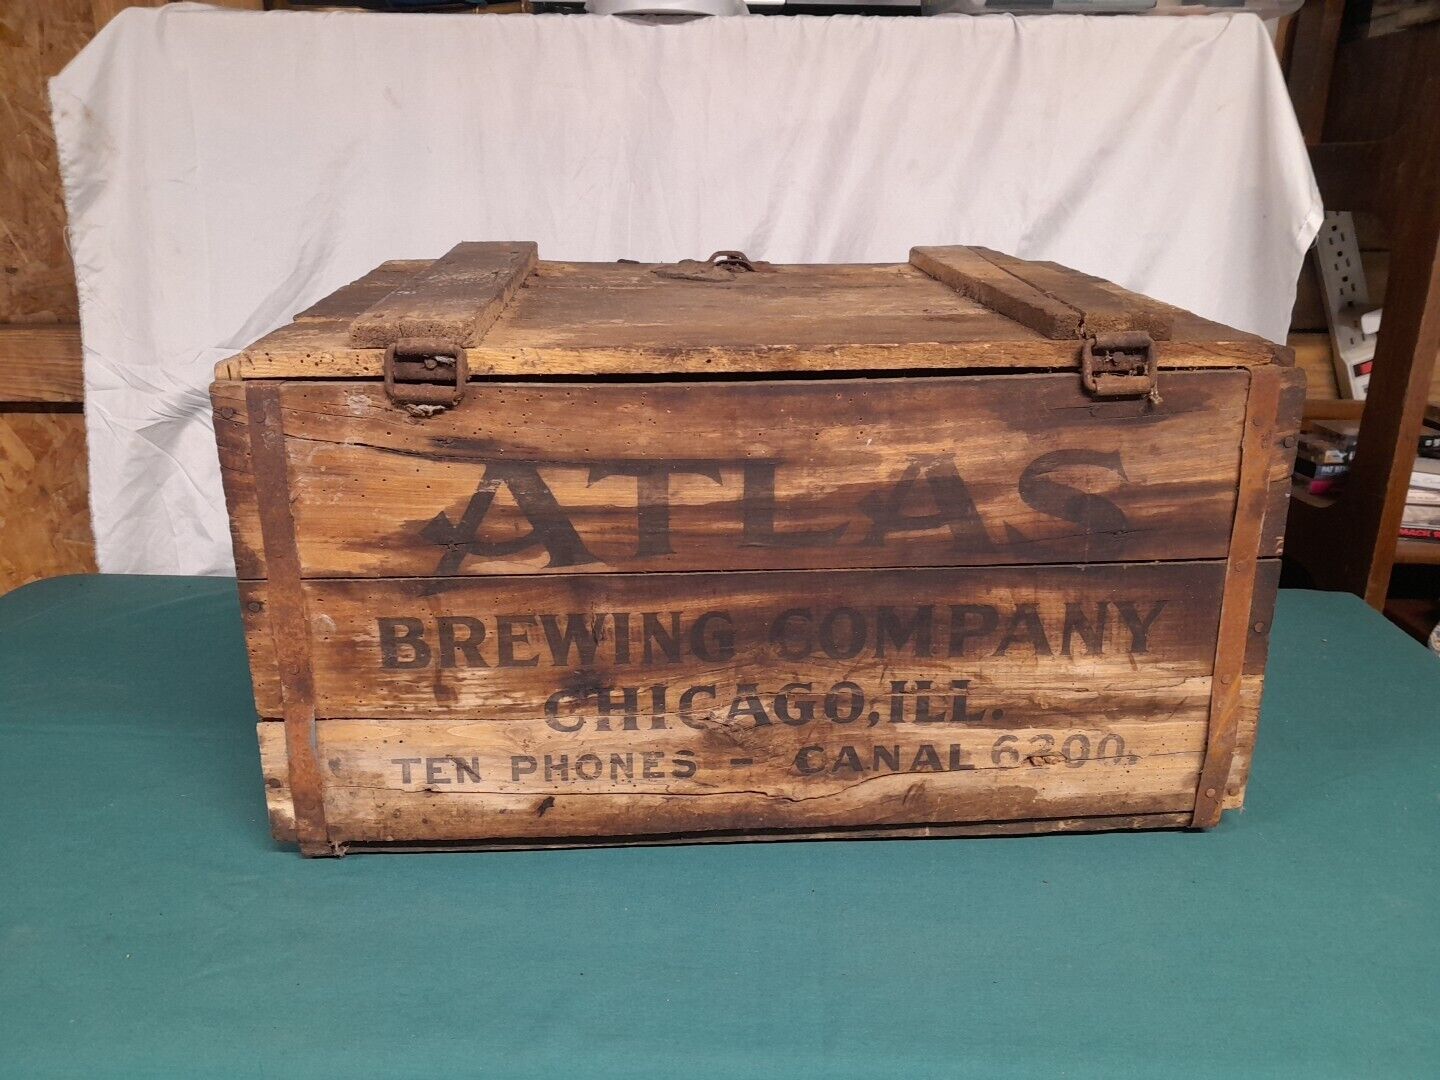 Vintage Atlas Brewing Company Wooden Crate Box Hinged Lid Latch Chicago ILL